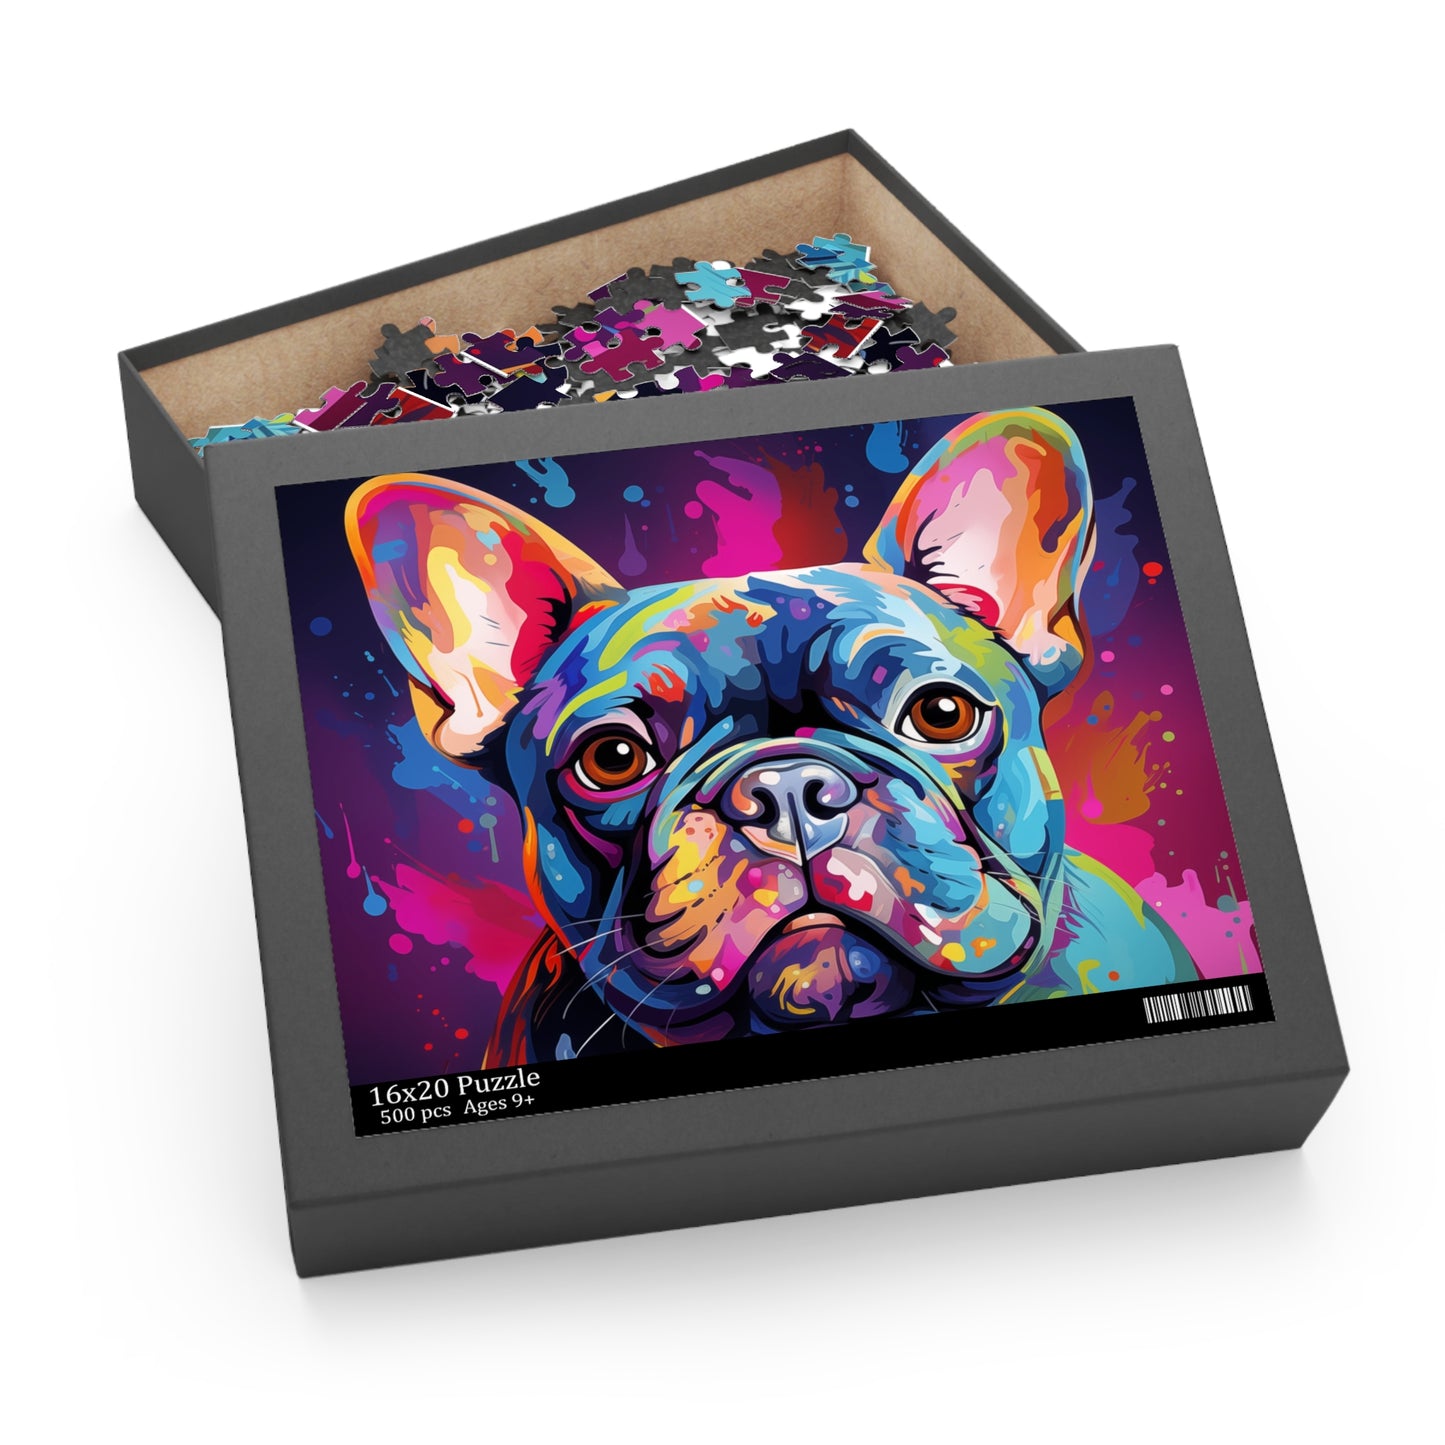 Oil Paint Watercolor Abstract Frenchie Dog Jigsaw Puzzle Adult Birthday Business Jigsaw Puzzle Gift for Him Funny Humorous Indoor Outdoor Game Gift For Her Online-4